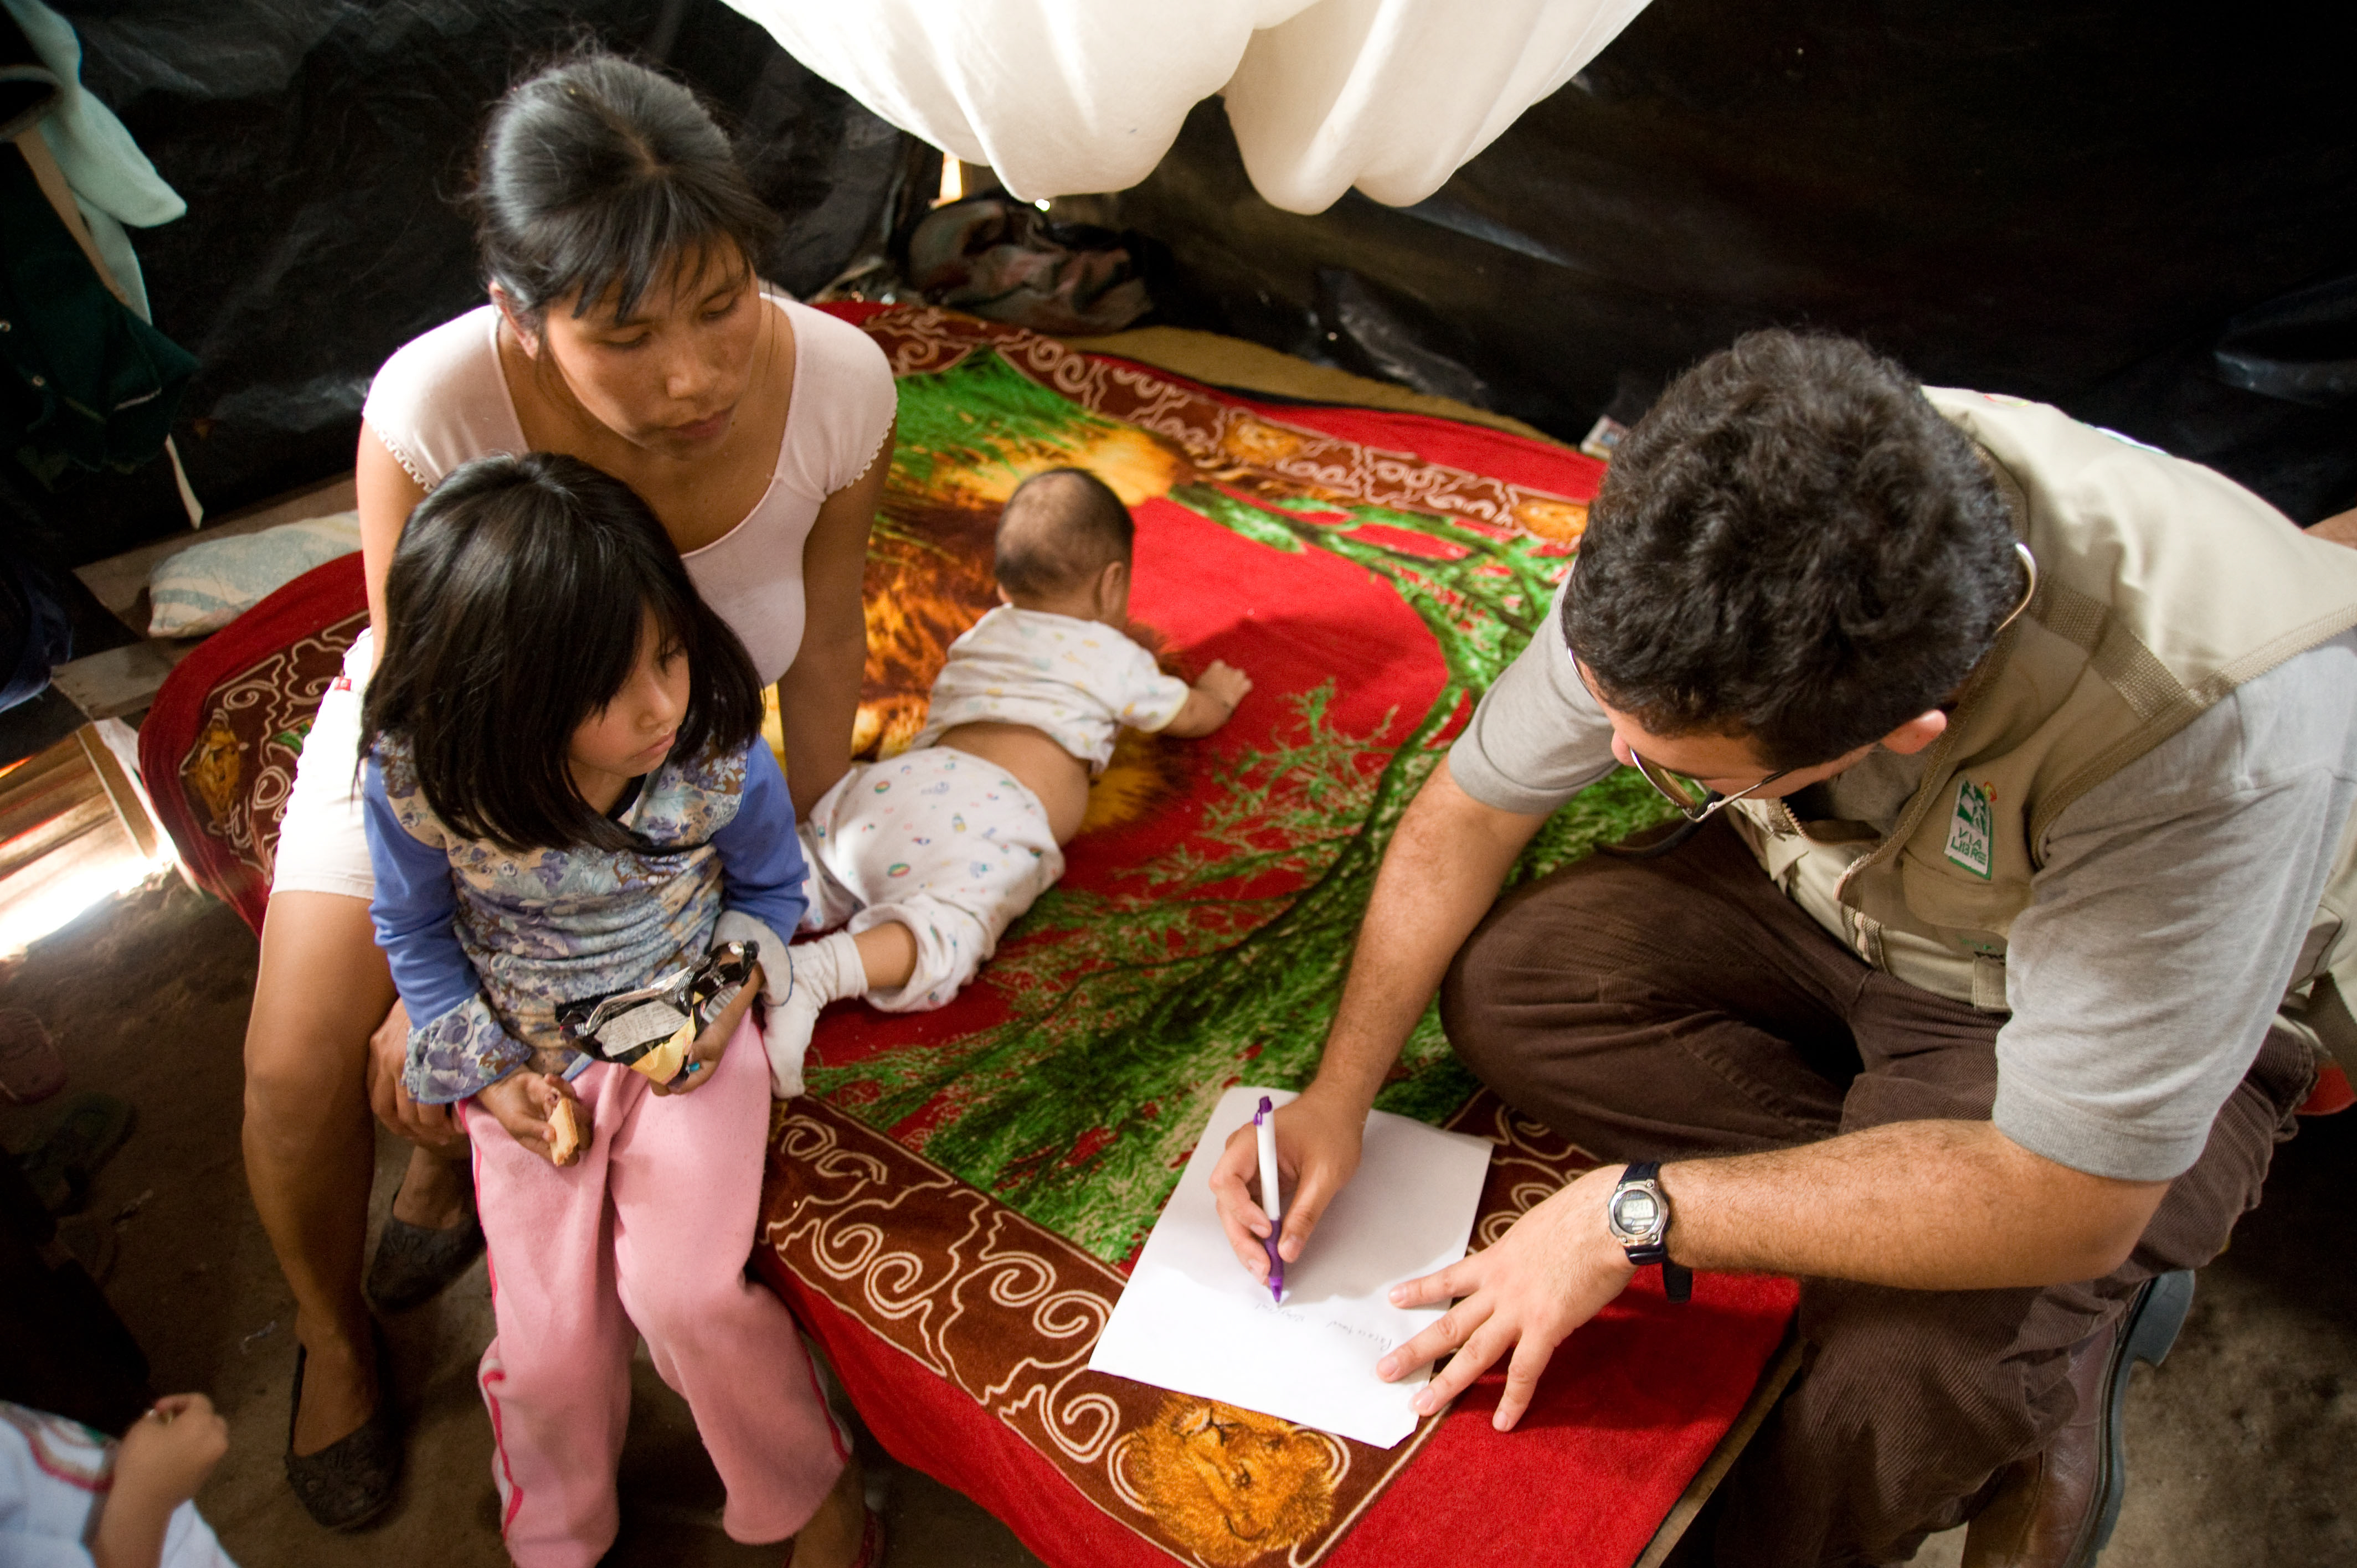 A researcher interviews a mother who is holding a young child while another child plays on the floor